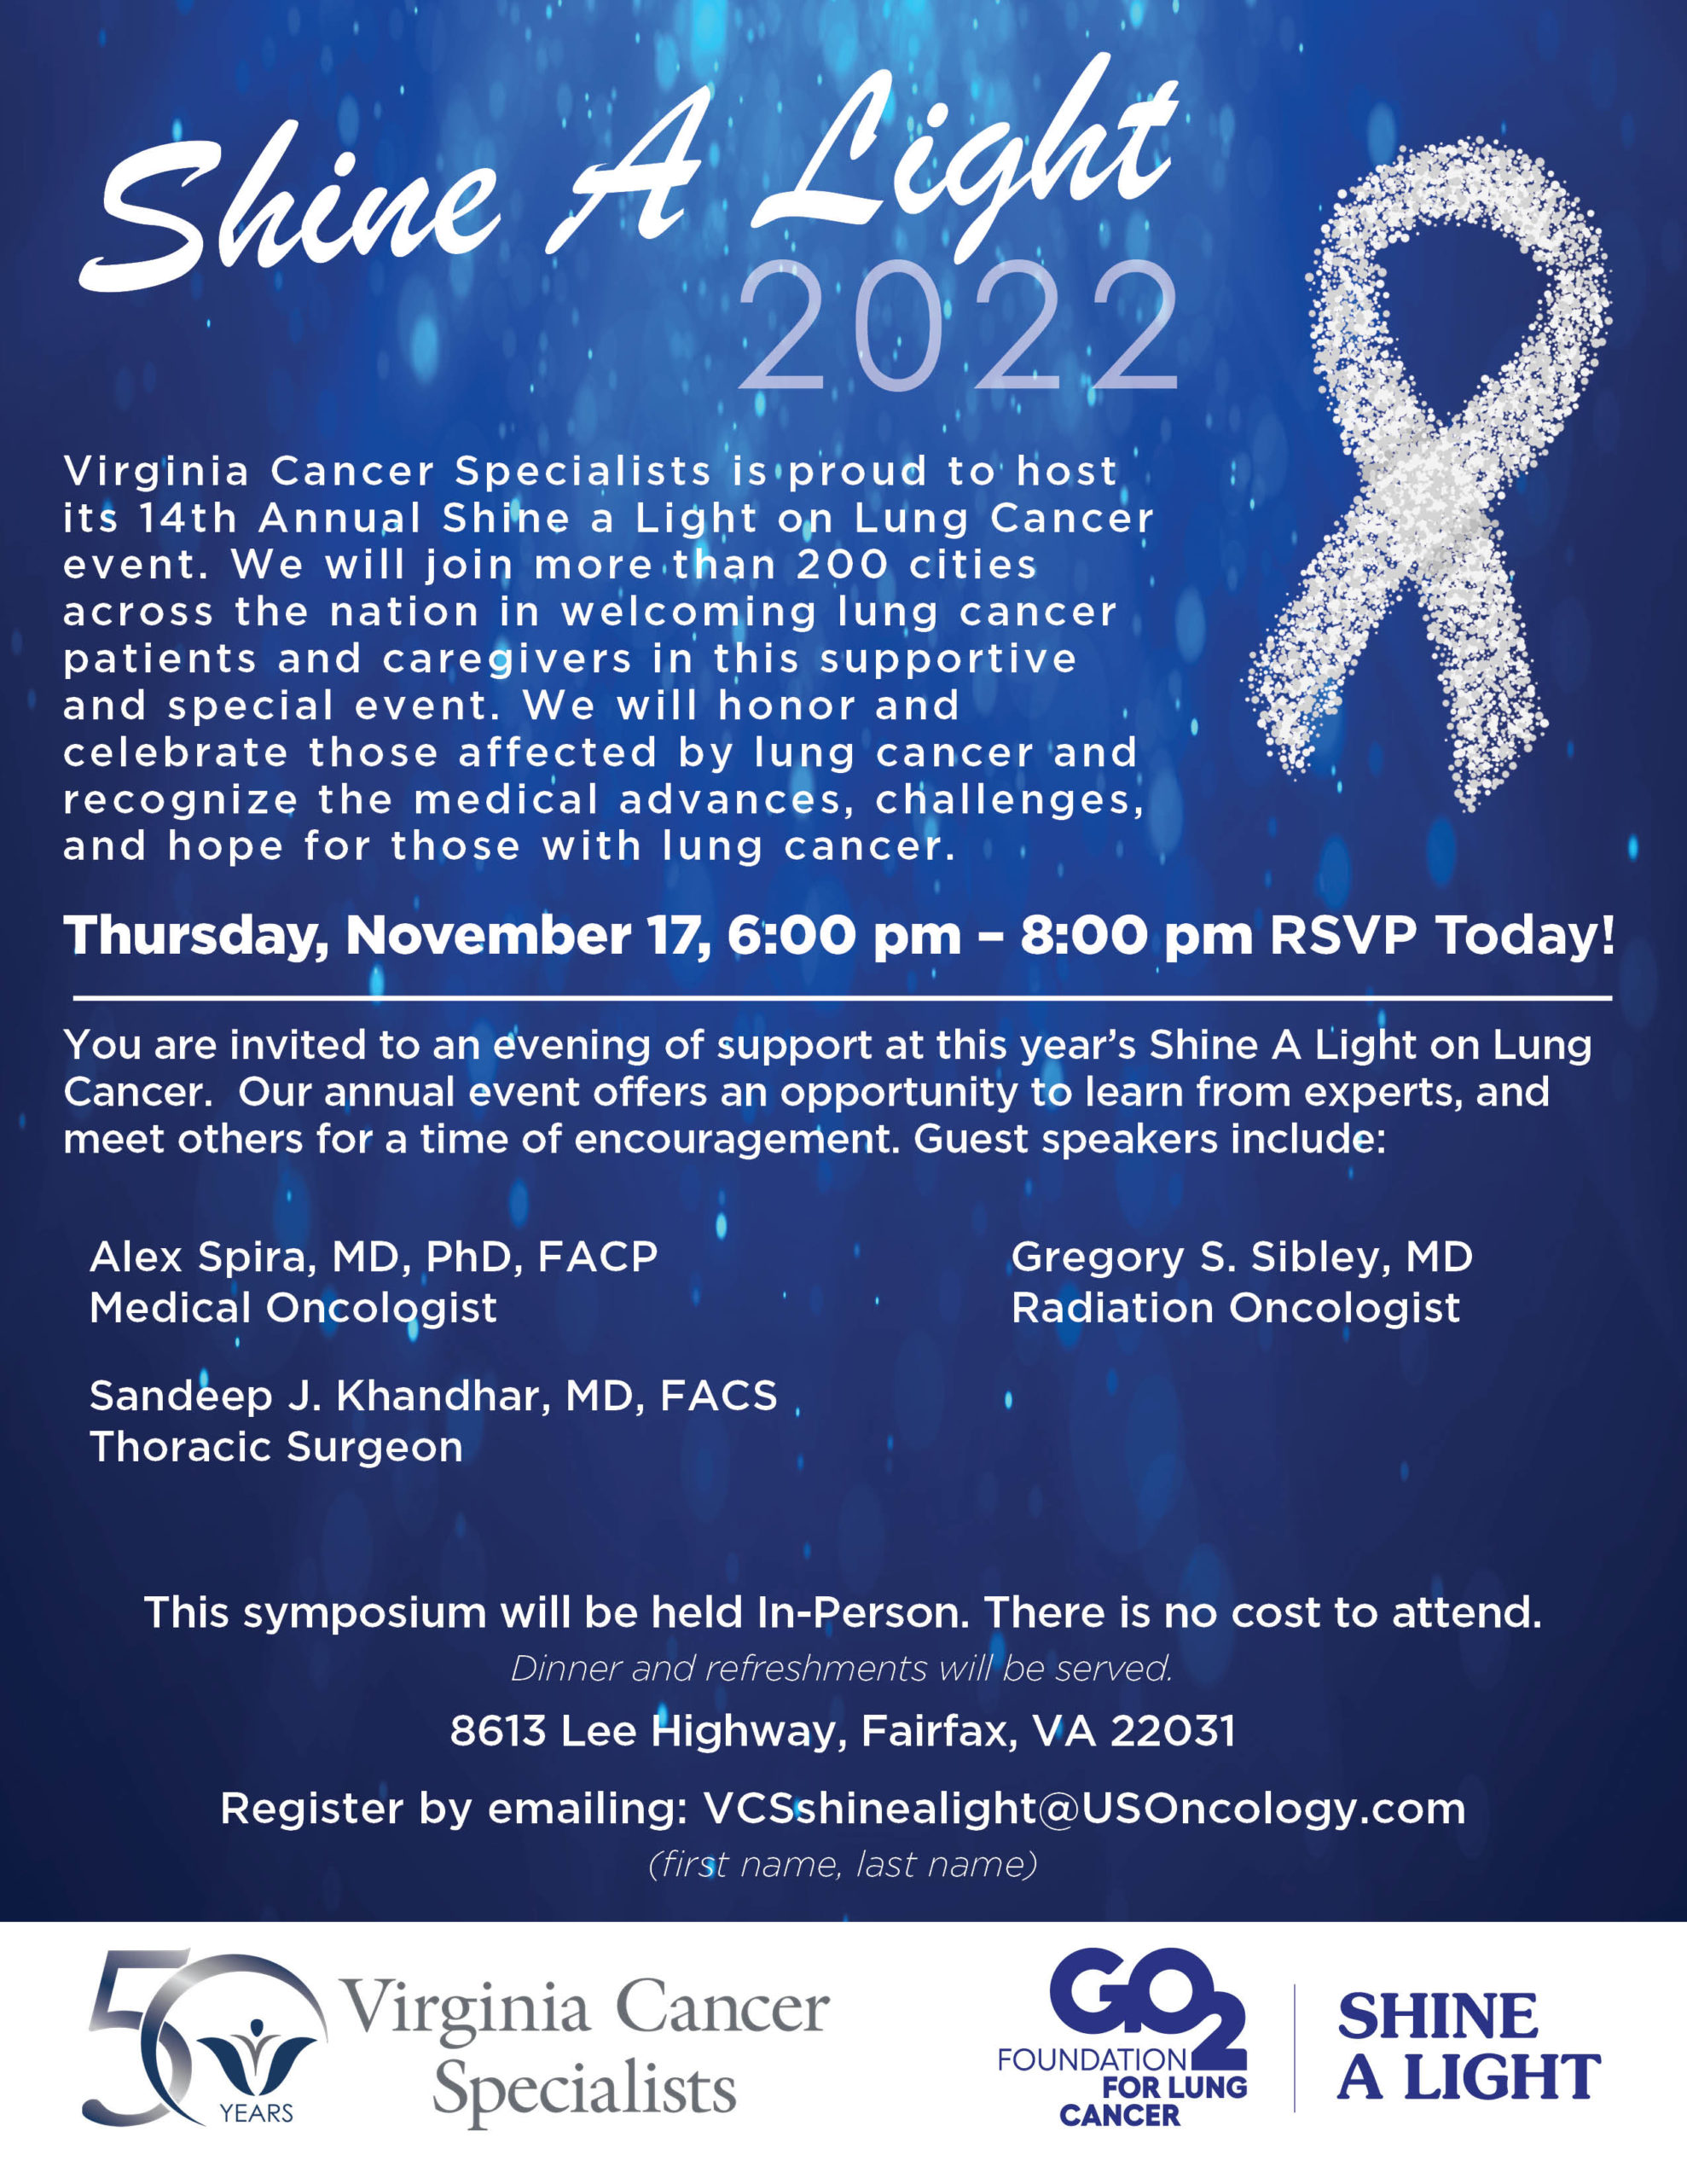 Shine A Light on Lung Cancer 2022 - Virginia Cancer Specialists